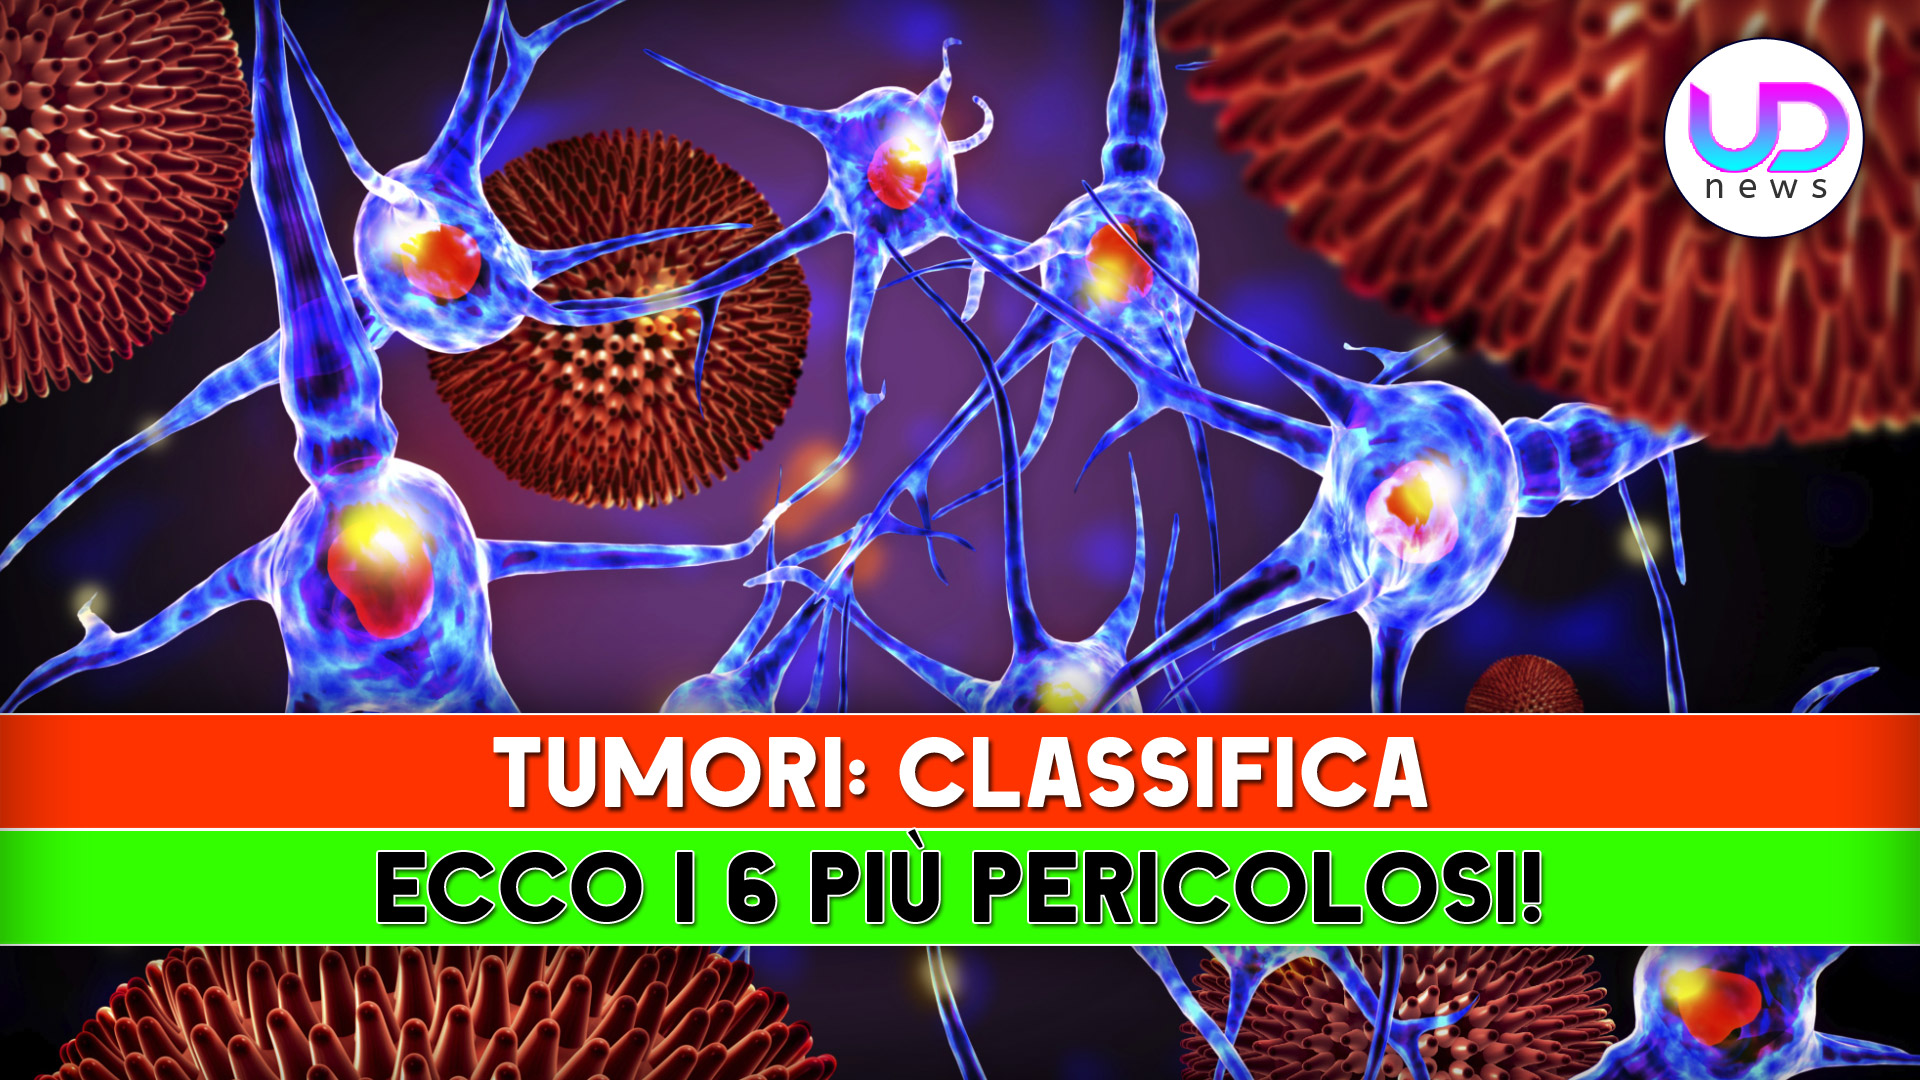 The Most Dangerous Tumors of All Time: Here They Are!